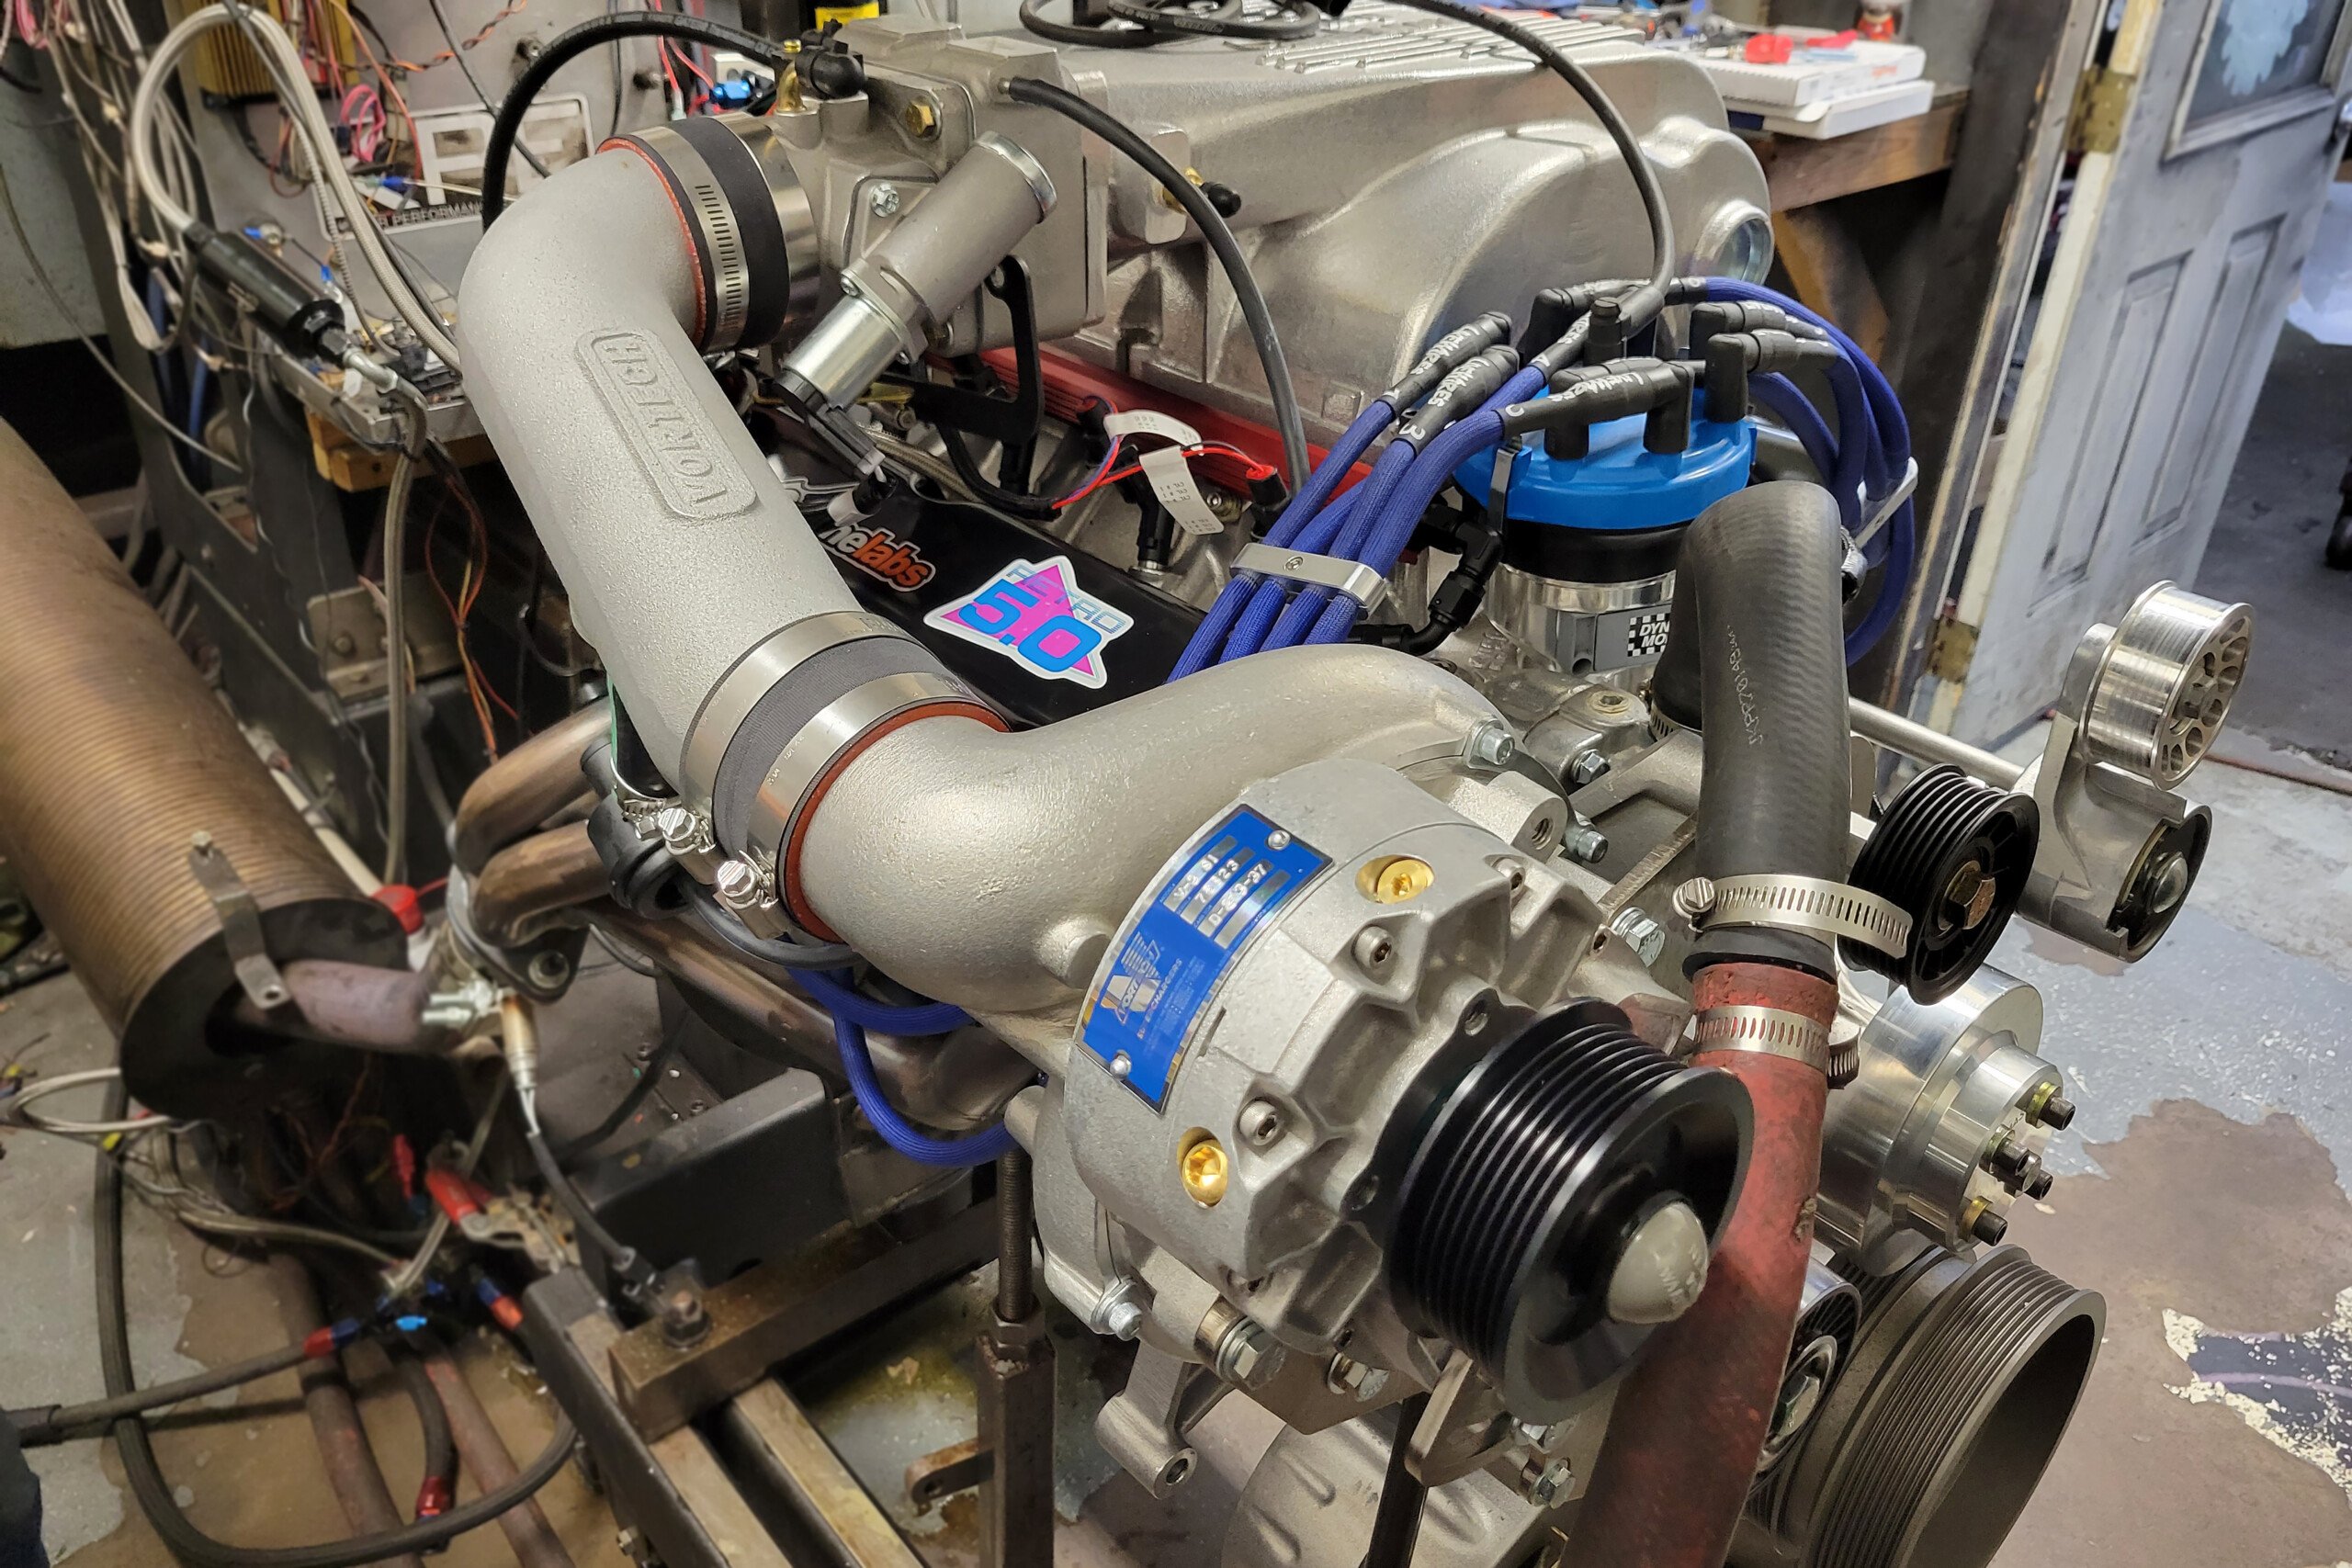 Retro 5.0 Makes Over 800 horsepower With A Vortech Supercharger